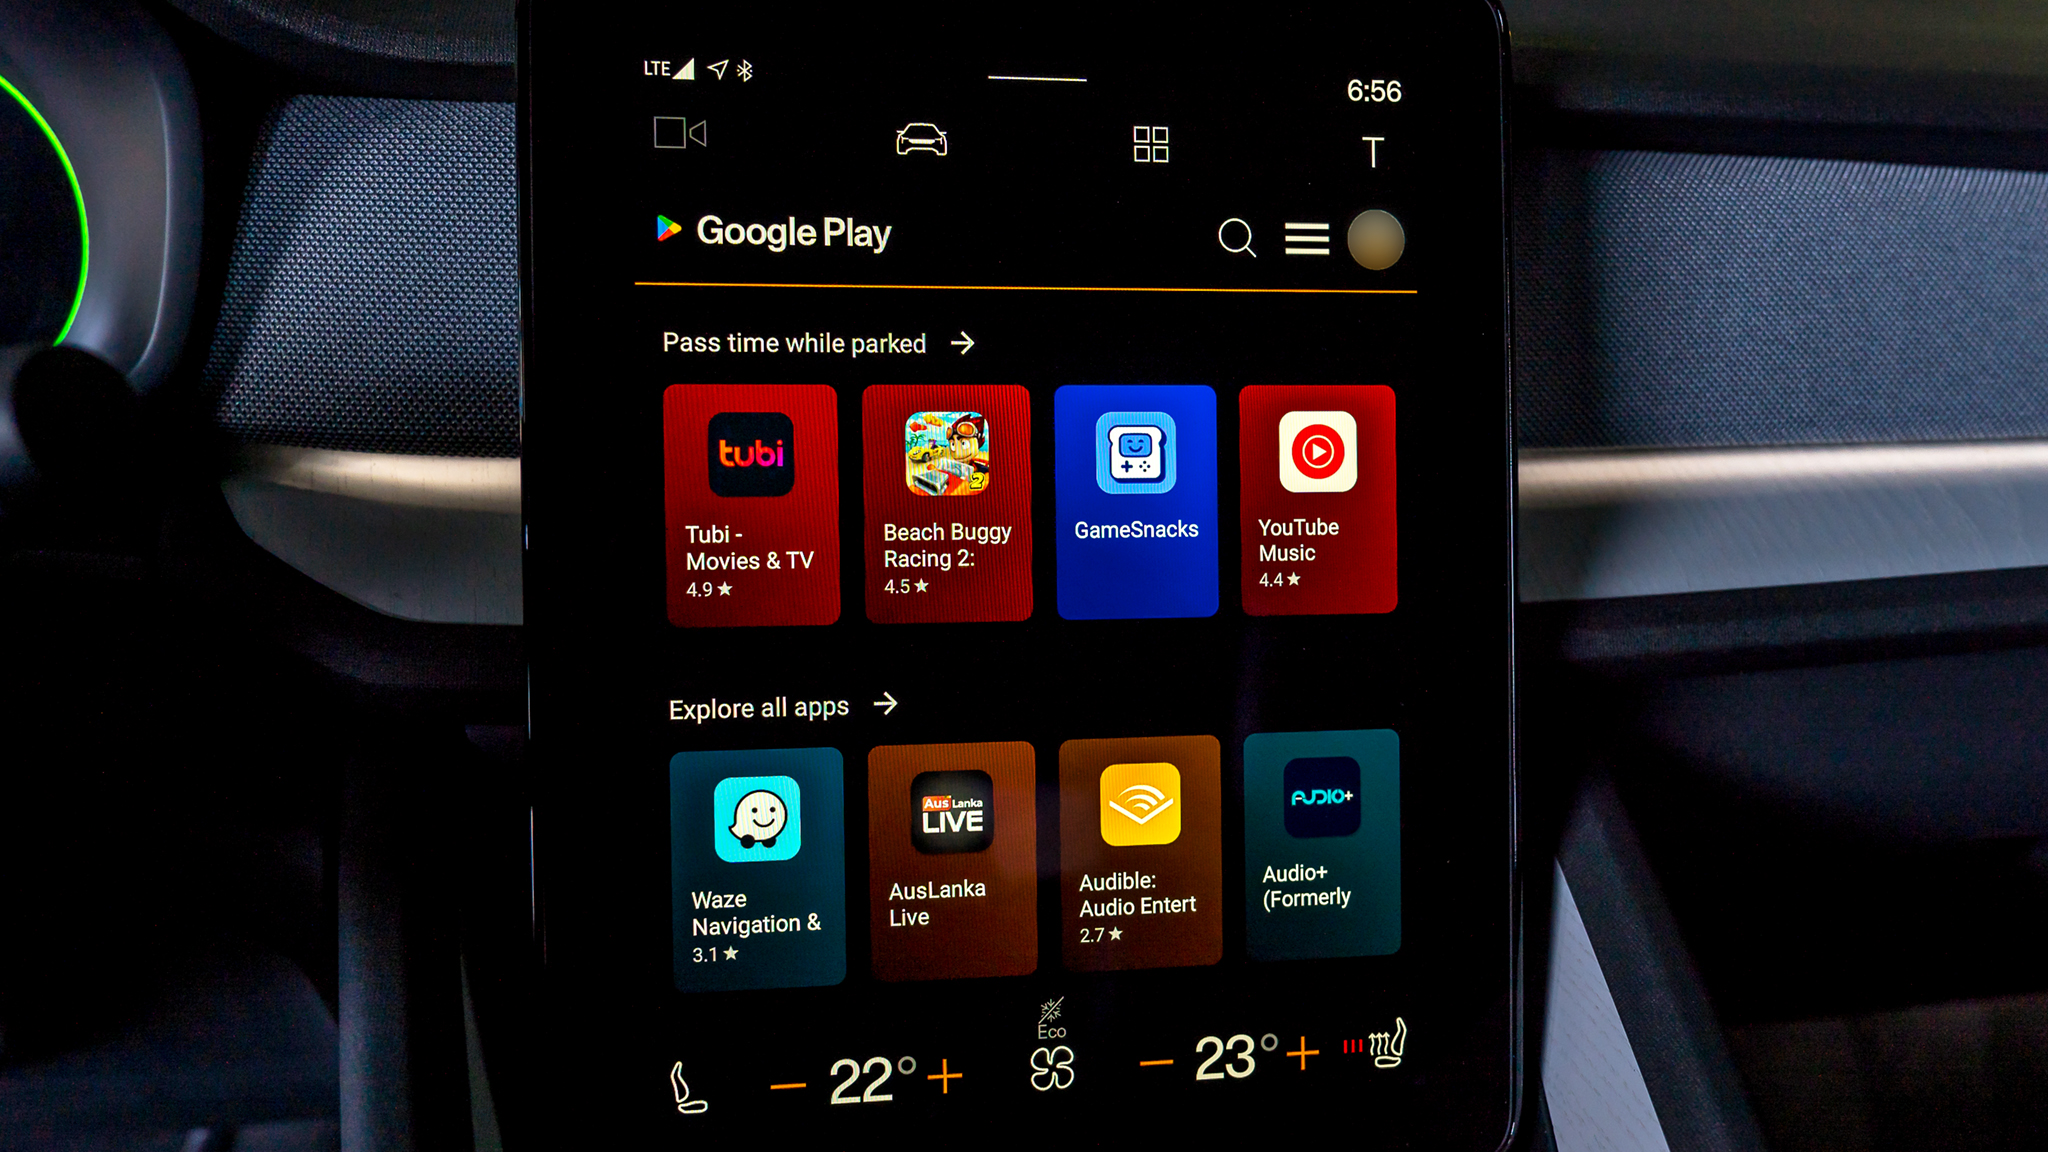 Android Automotive screen download apps.